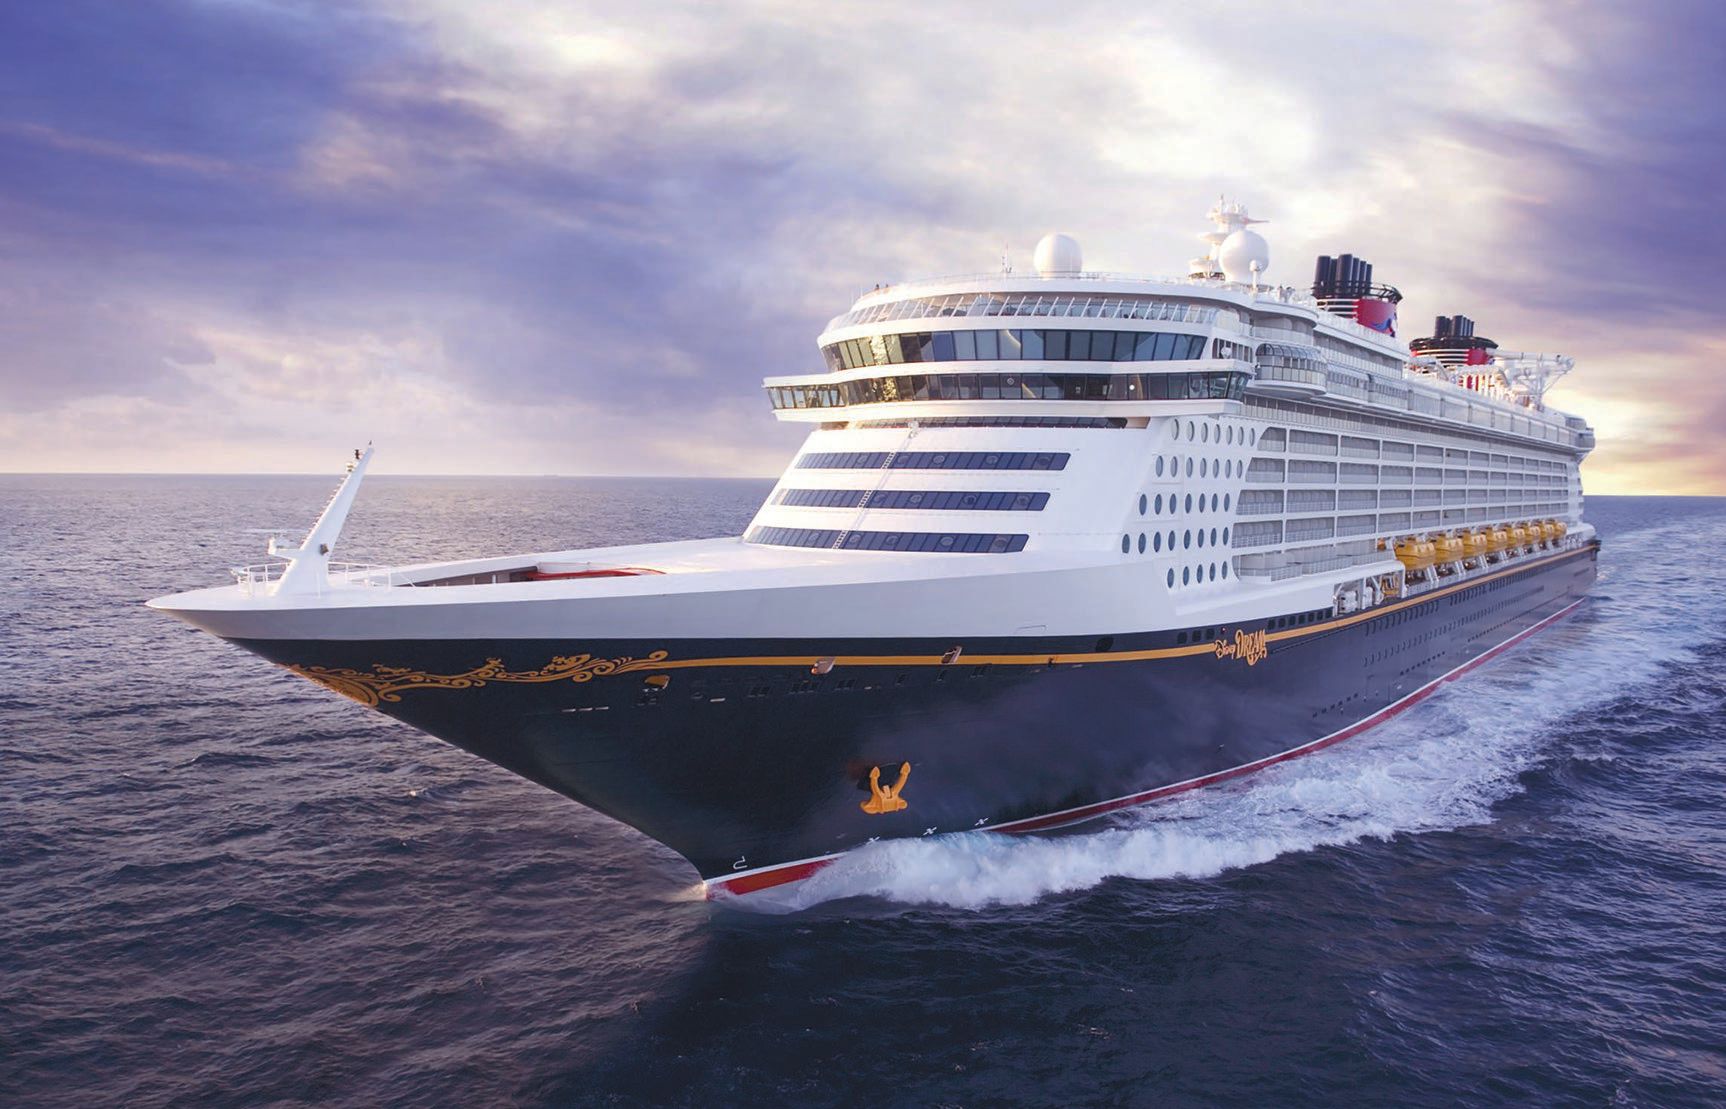 On the Disney Dream, adults can recharge and kids can immerse themselves in worlds of wonder PHOTO BY MATT STROSHANE